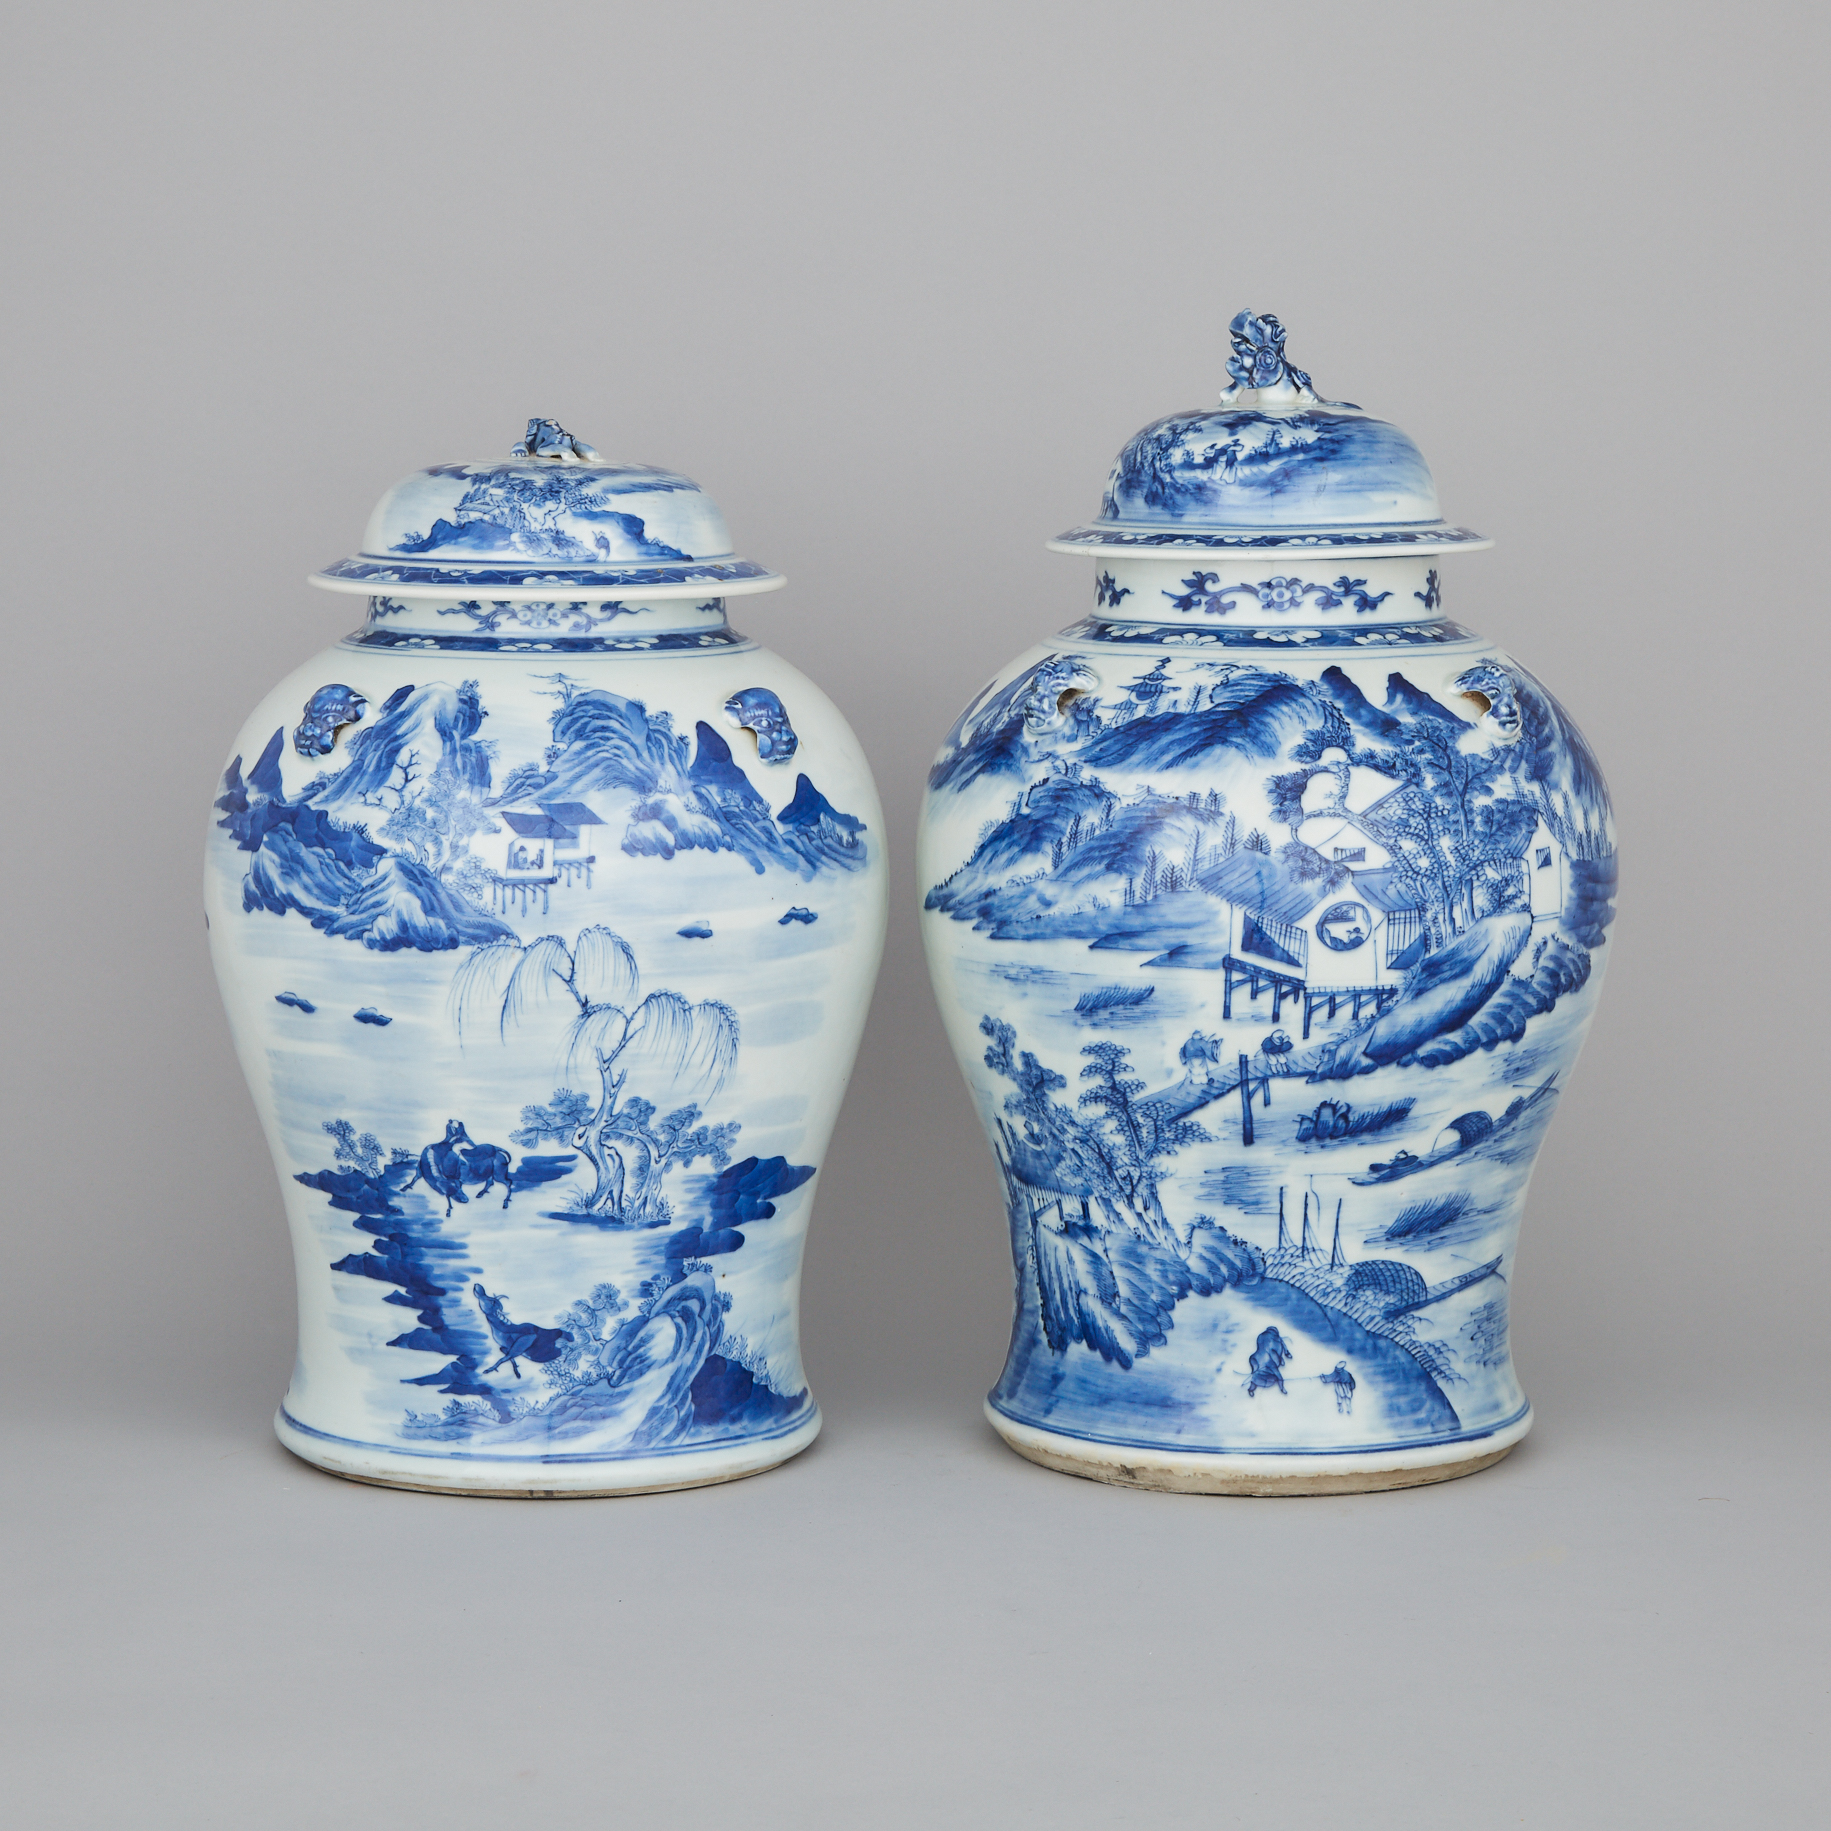 A Pair of Large Blue and White Lidded Temple Jars, 19th Century